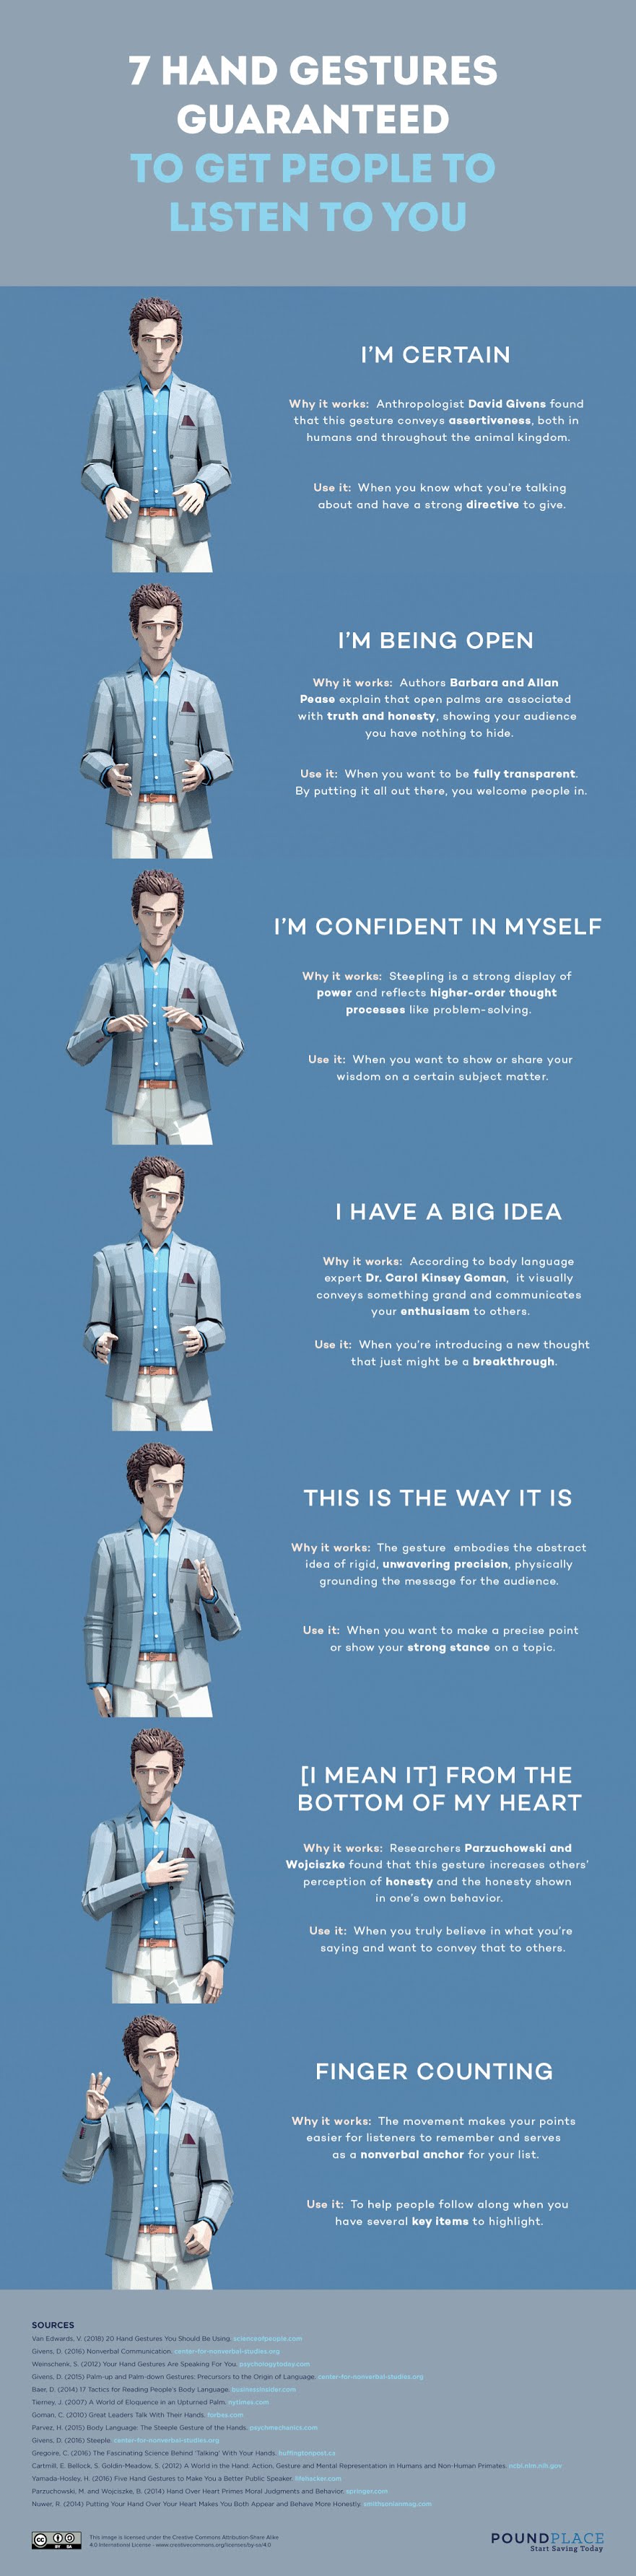 7 Hand Gestures Guaranteed To Get People To Listen To You - #infographic